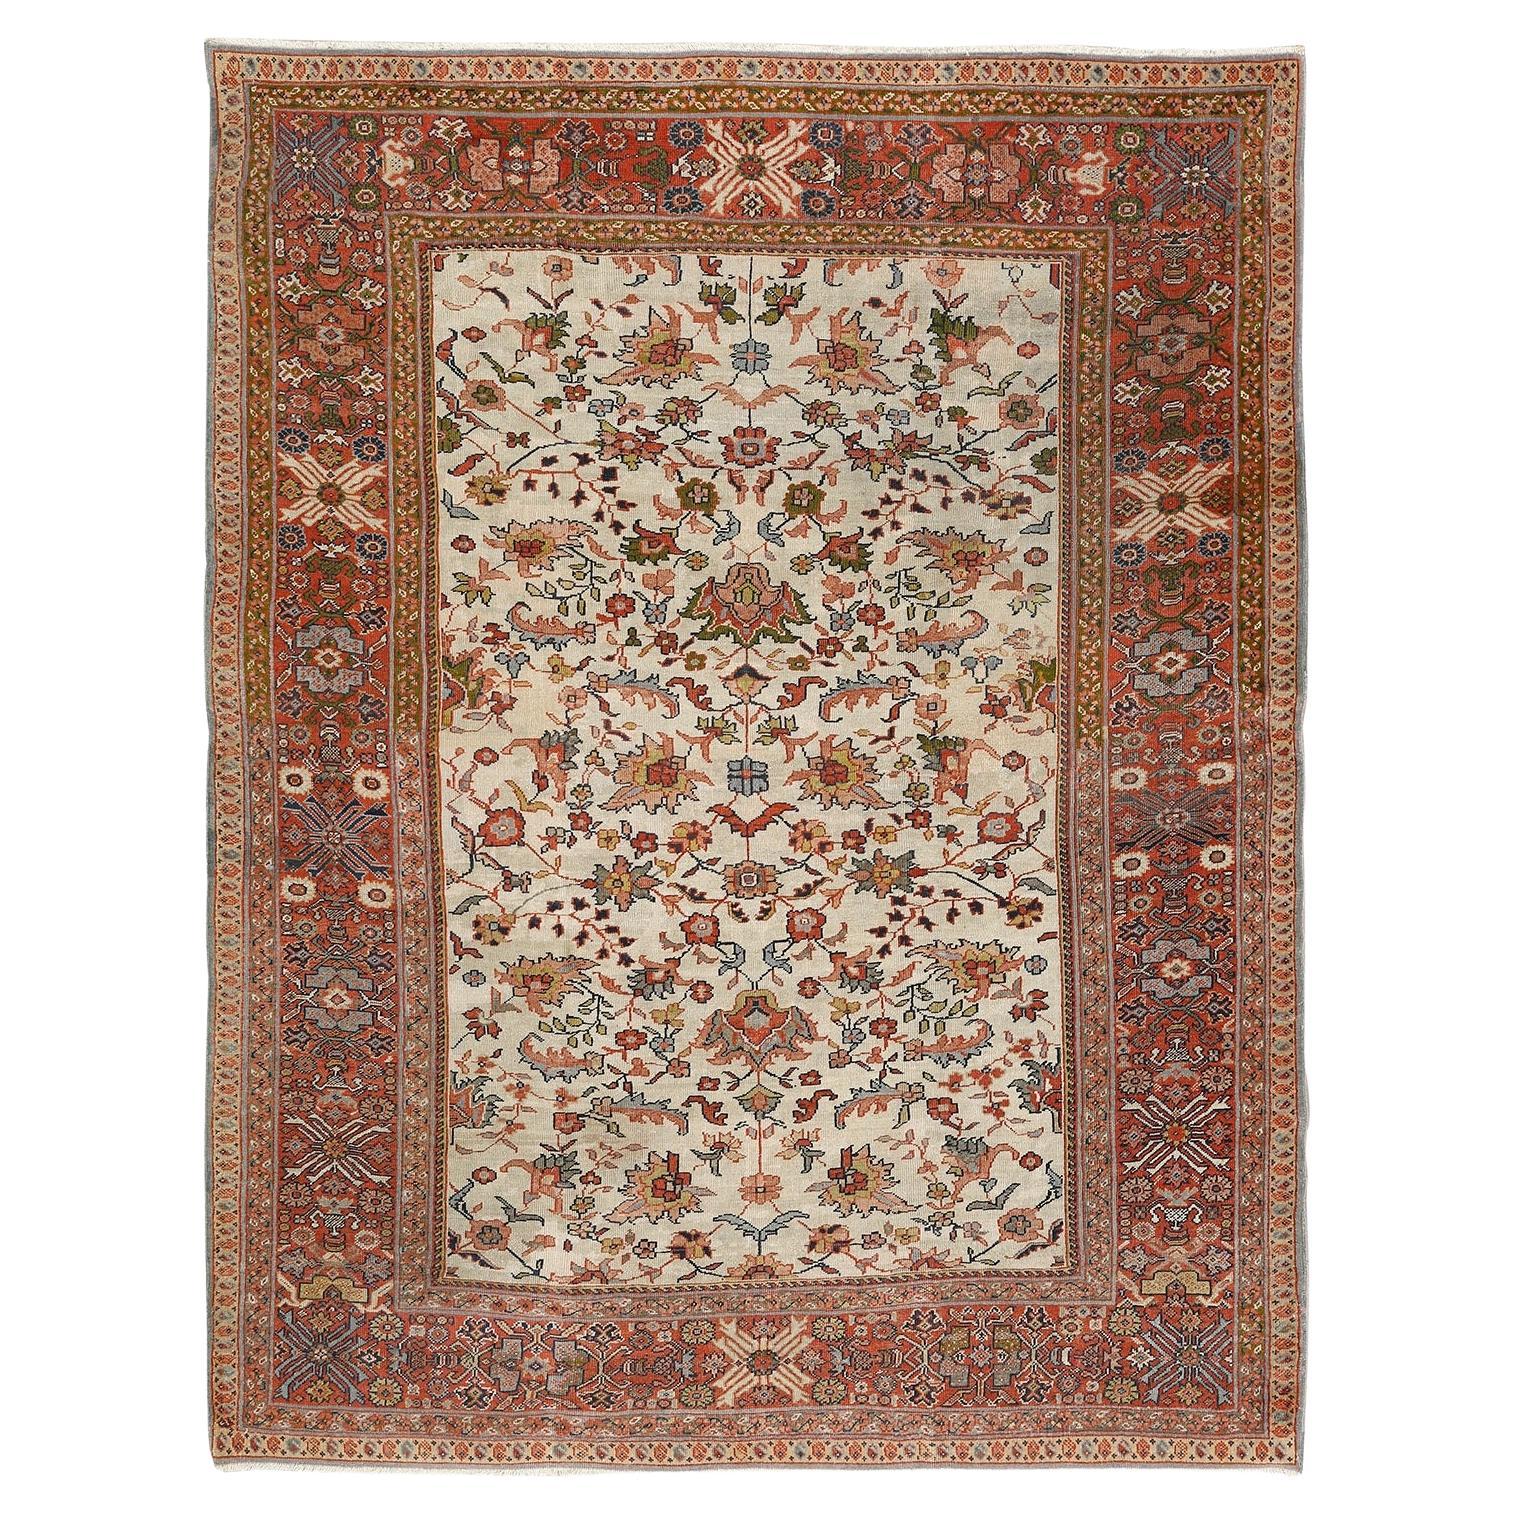 Damoka Collection Antique Persian Sultanabad - Size: 10 ft 6 in x 8 ft 2 in